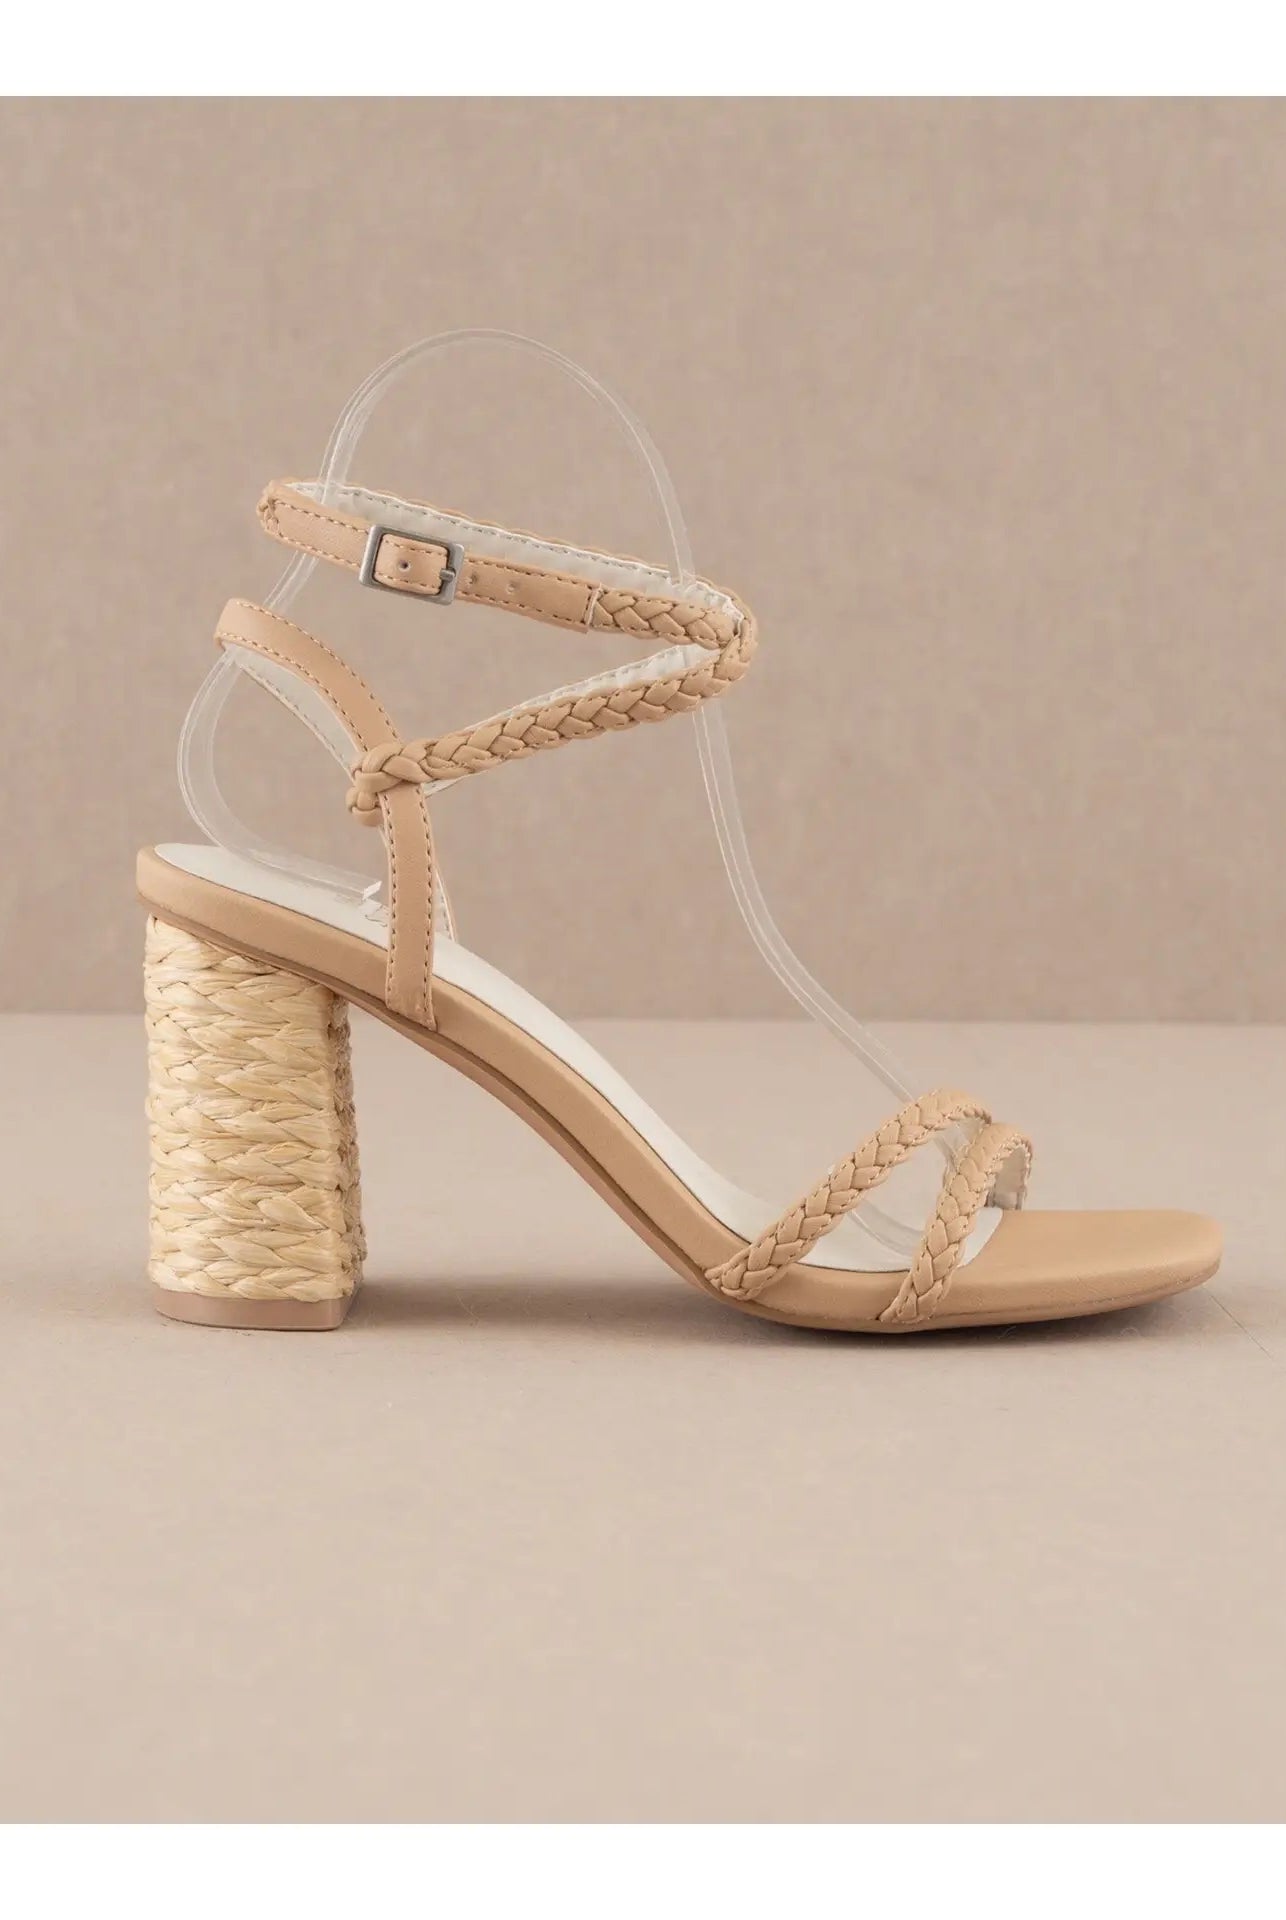 Naturally Neutral Sandal-Sandals-The Lovely Closet-The Lovely Closet, Women's Fashion Boutique in Alexandria, KY